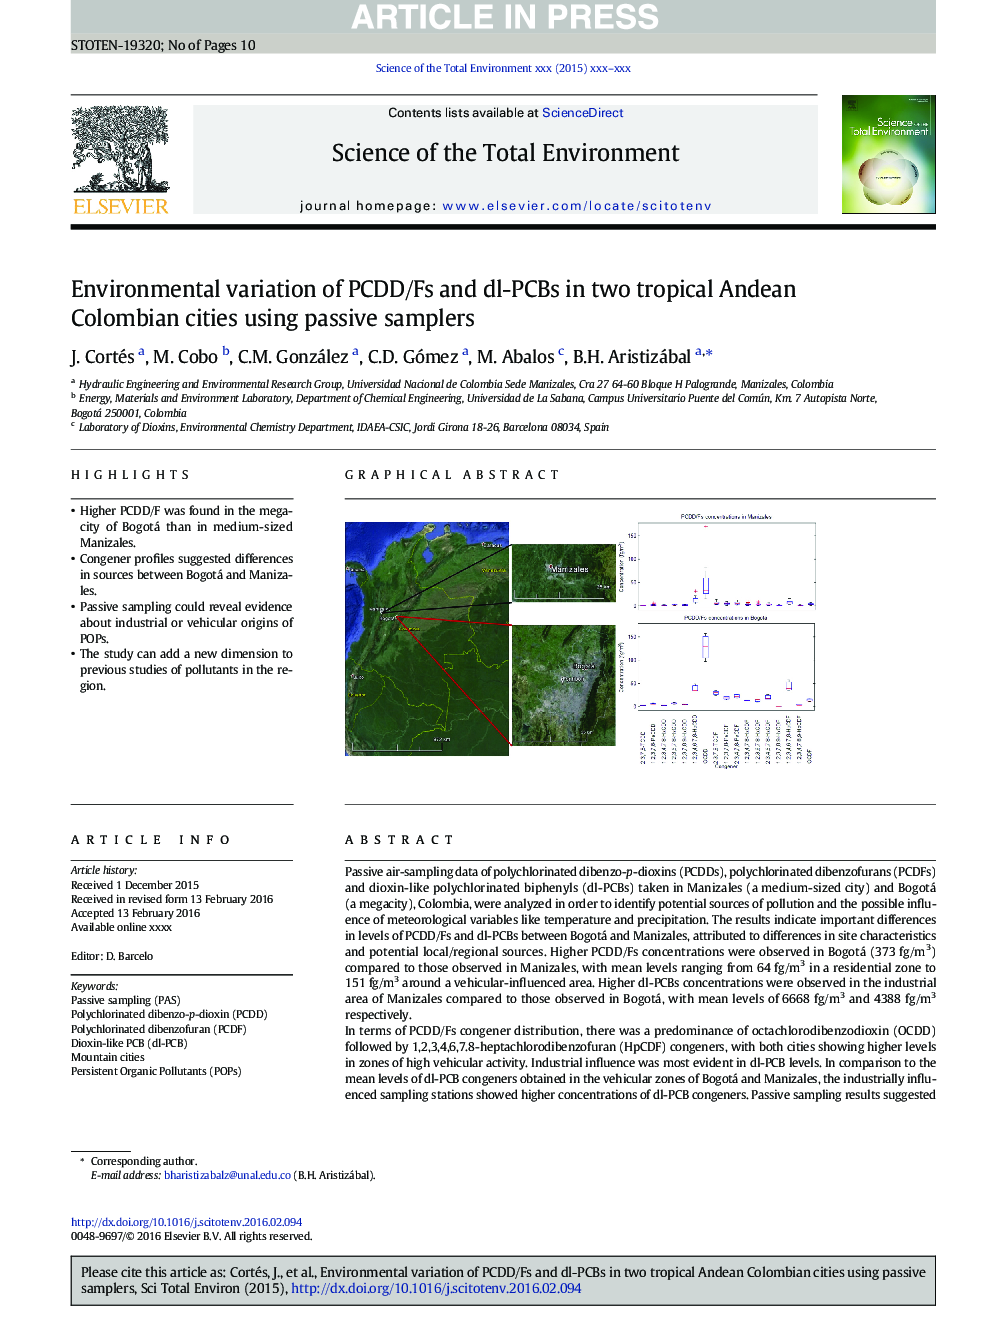 Environmental variation of PCDD/Fs and dl-PCBs in two tropical Andean Colombian cities using passive samplers